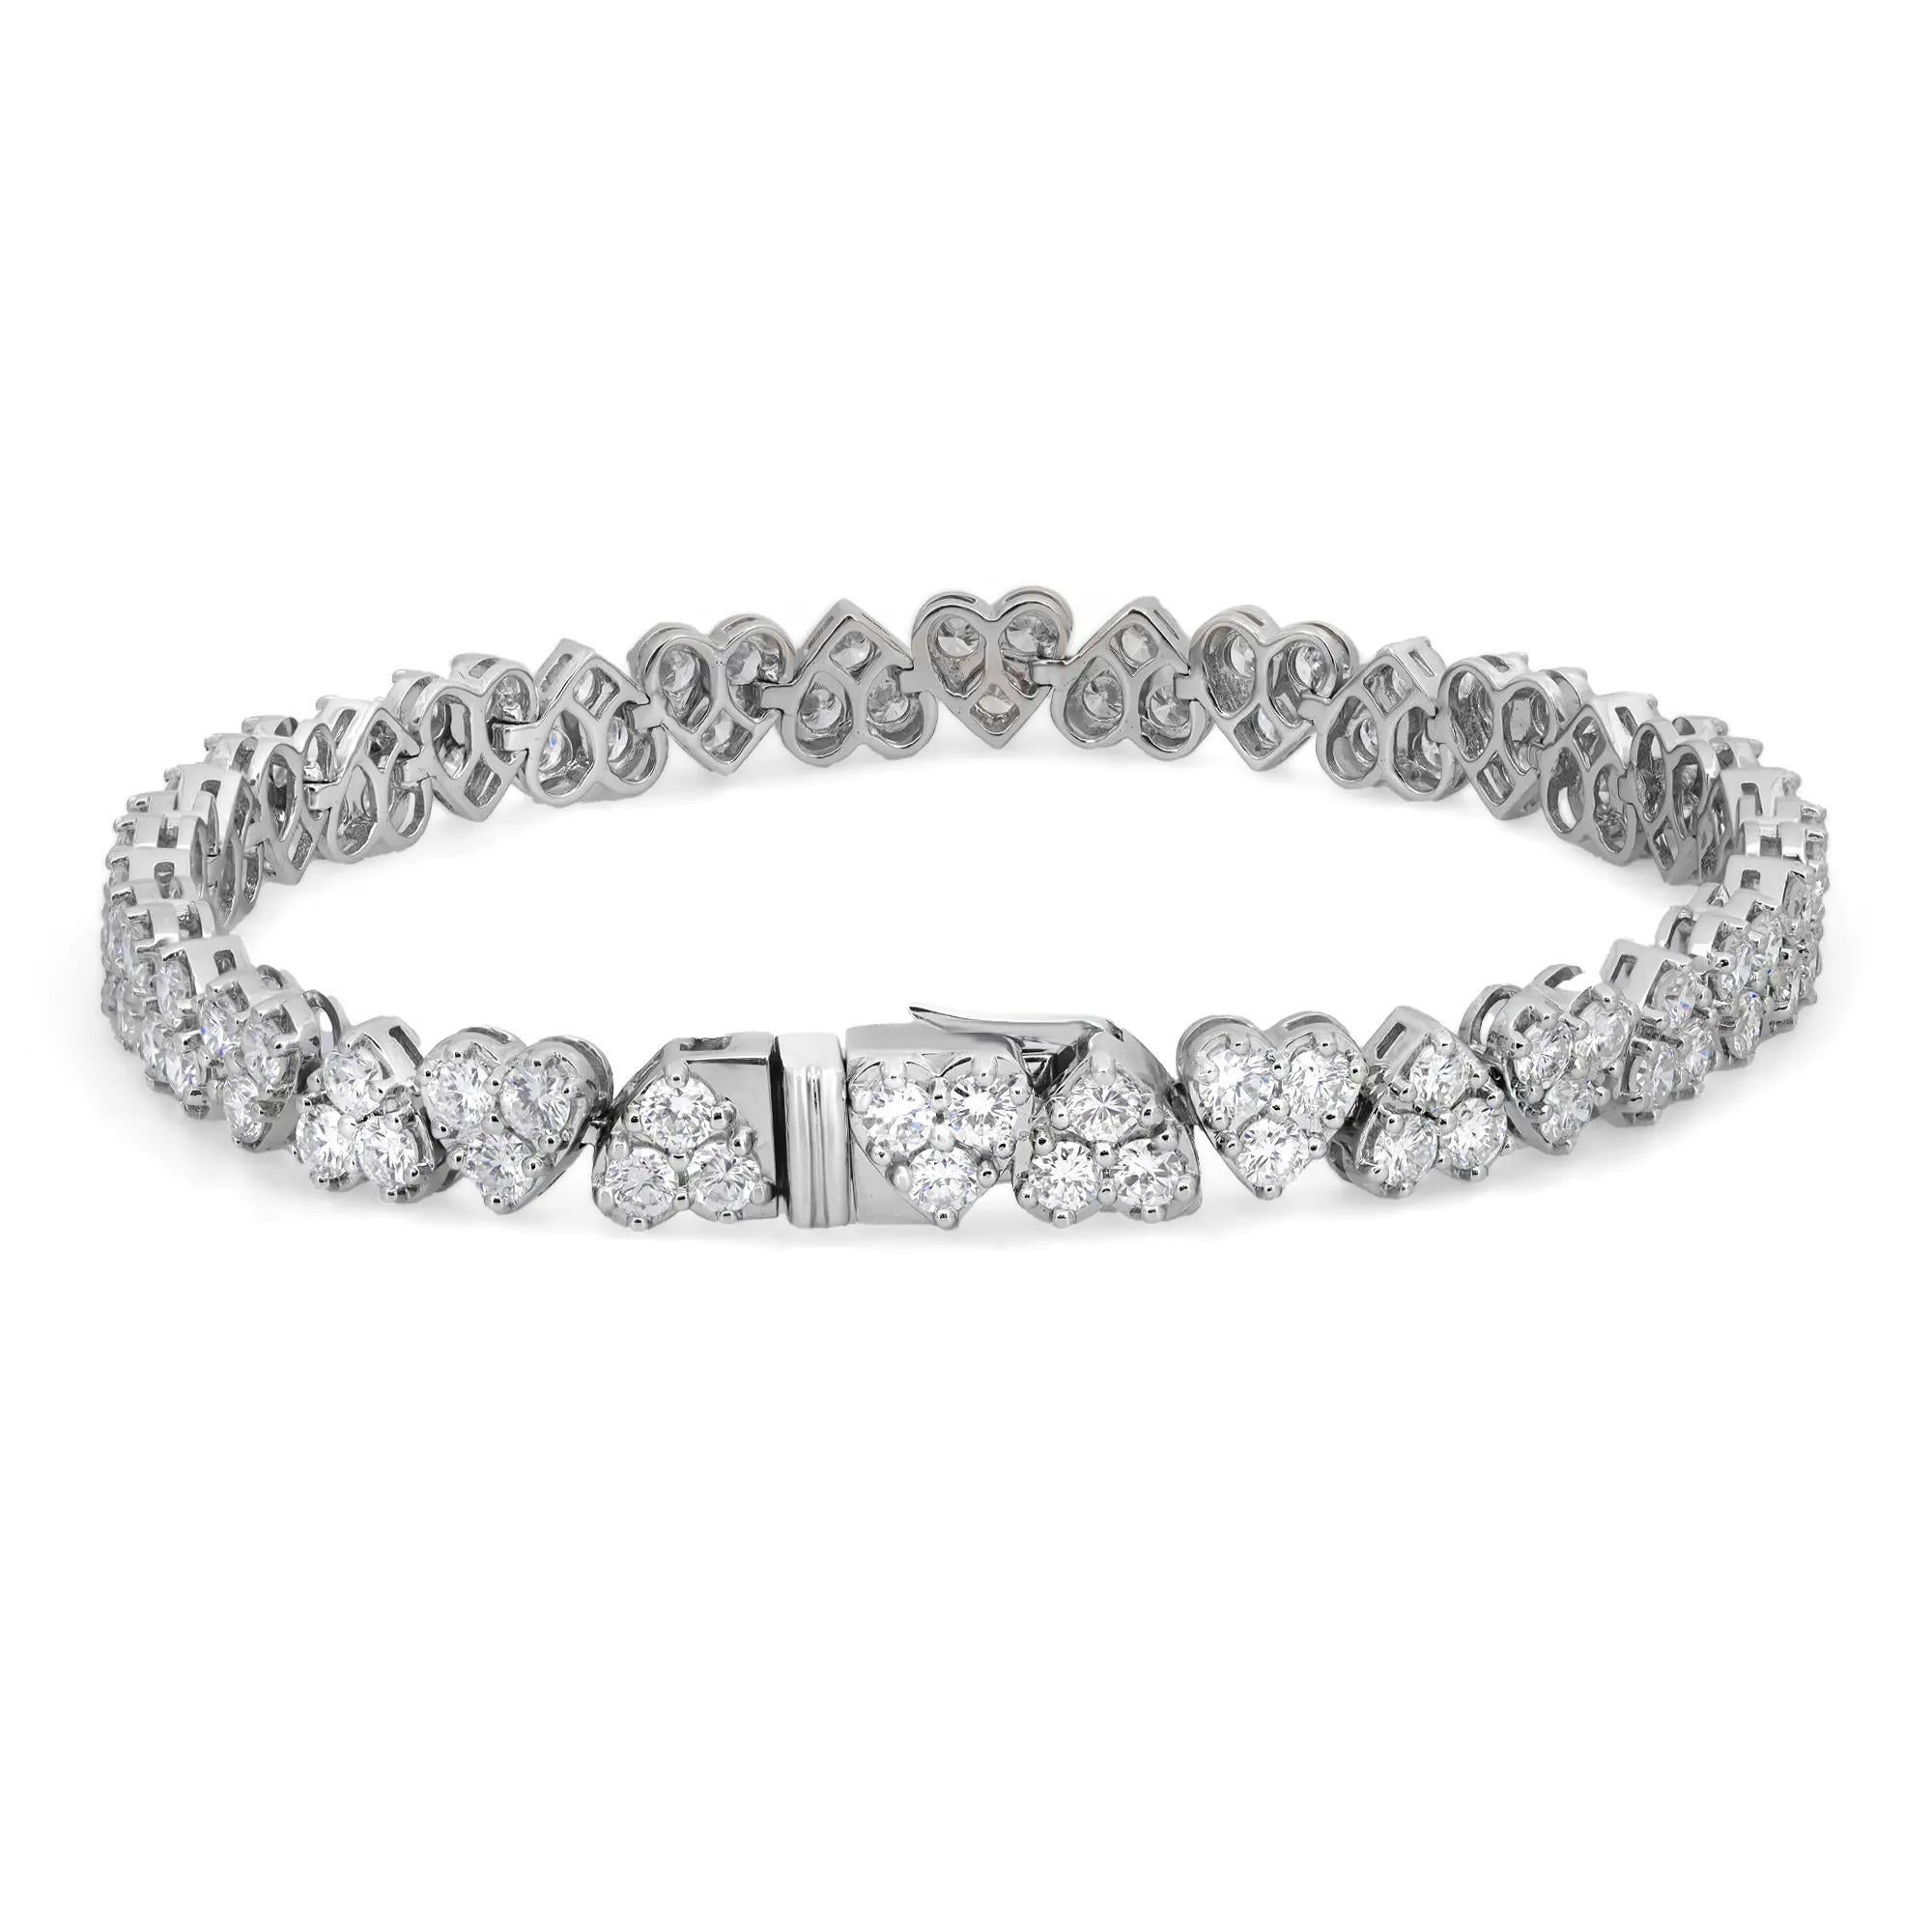 This exquisite Rachael Koen tennis bracelet features sparkling prong set round brilliant cut diamonds studded in heart shaped links. Crafted in high polished 18k white gold. Lightweight, super stackable, and a perfect gift for your loved ones. This